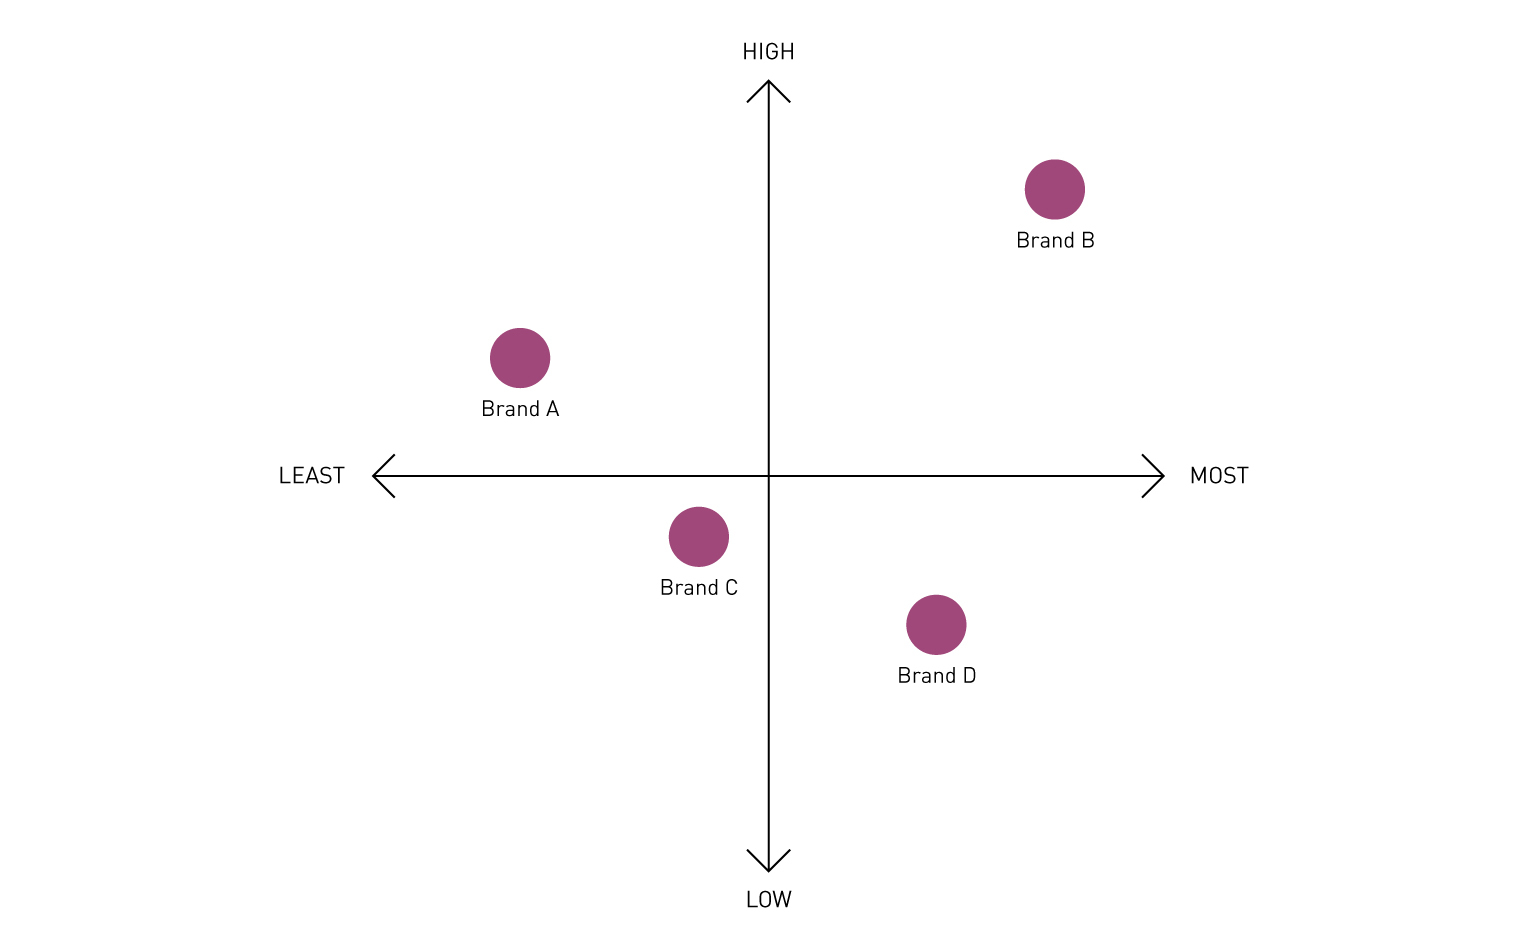 An example of a brand positioning map includes 4 brands positioned on across 4 different quadrants